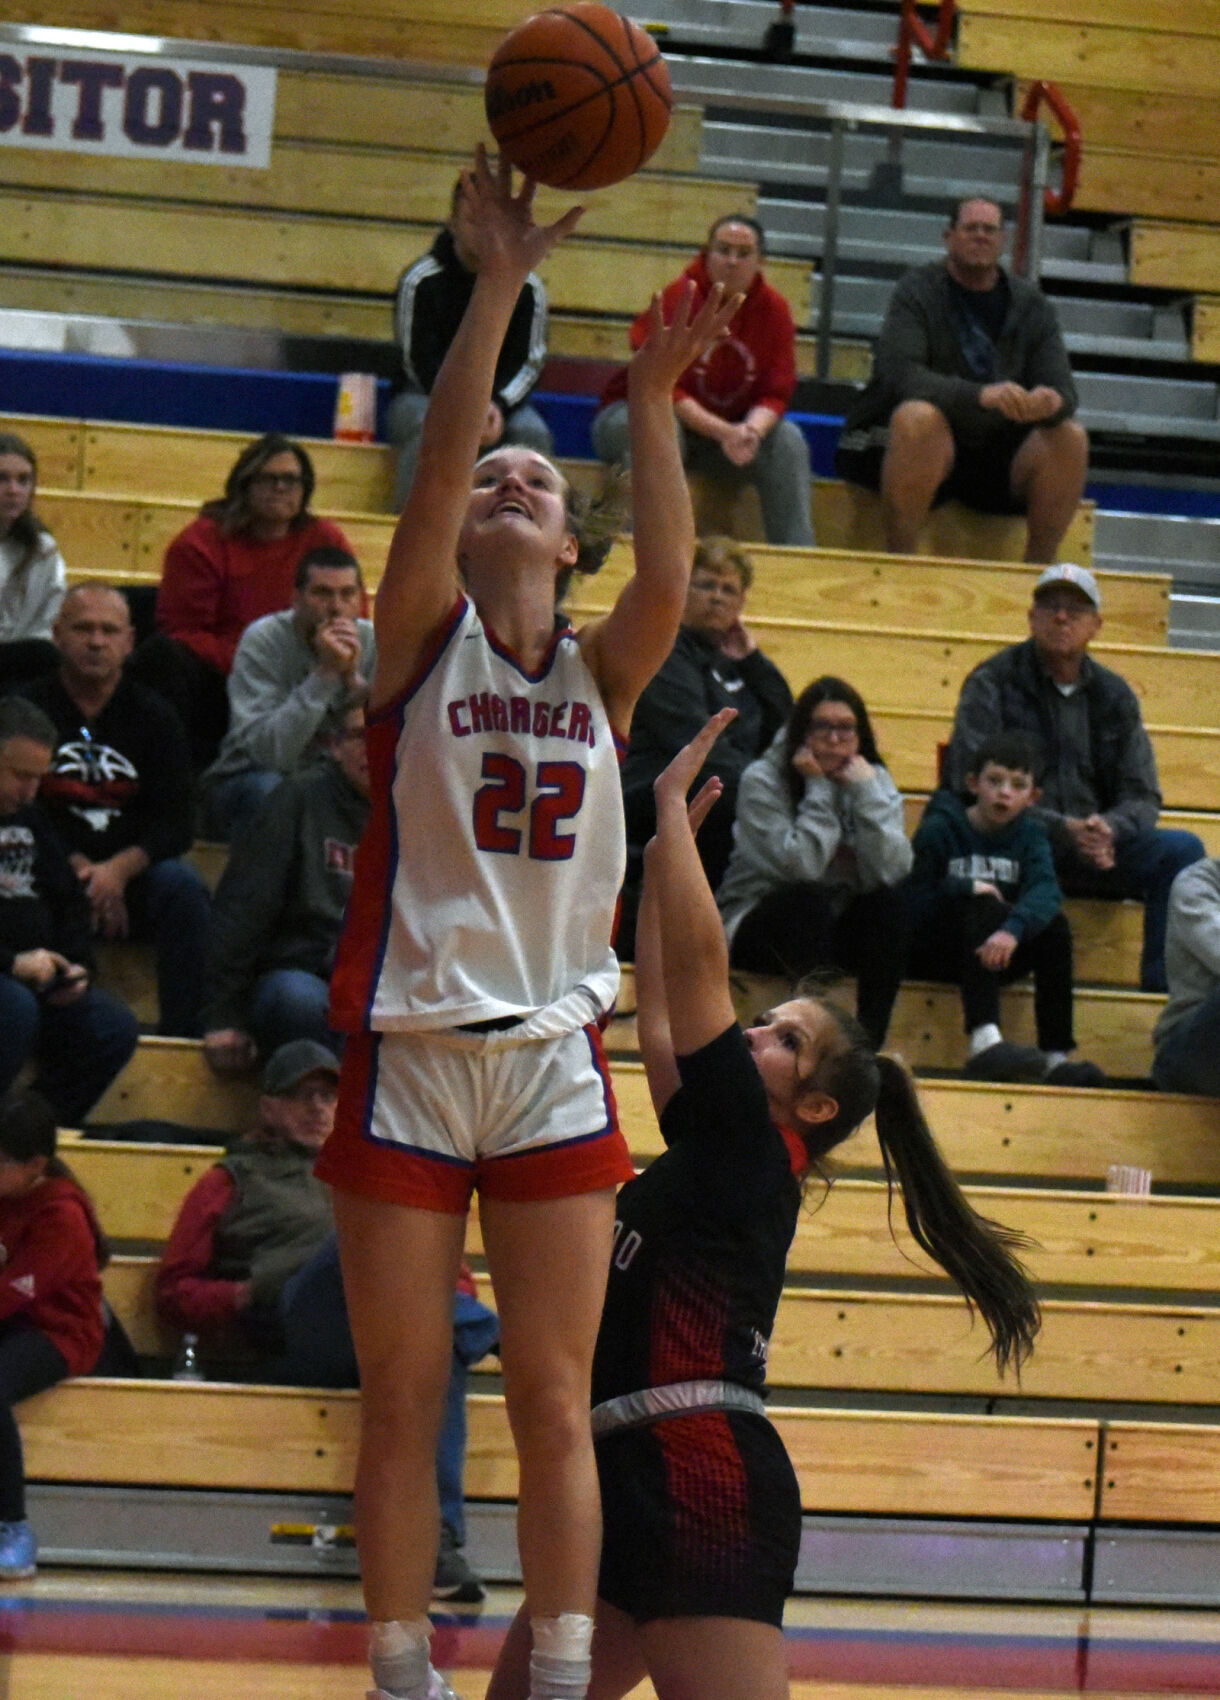 North Decatur Lady Chargers Hosts 4-Team Holiday Basketball Tournament, Madi Allen Leads Team to Victory